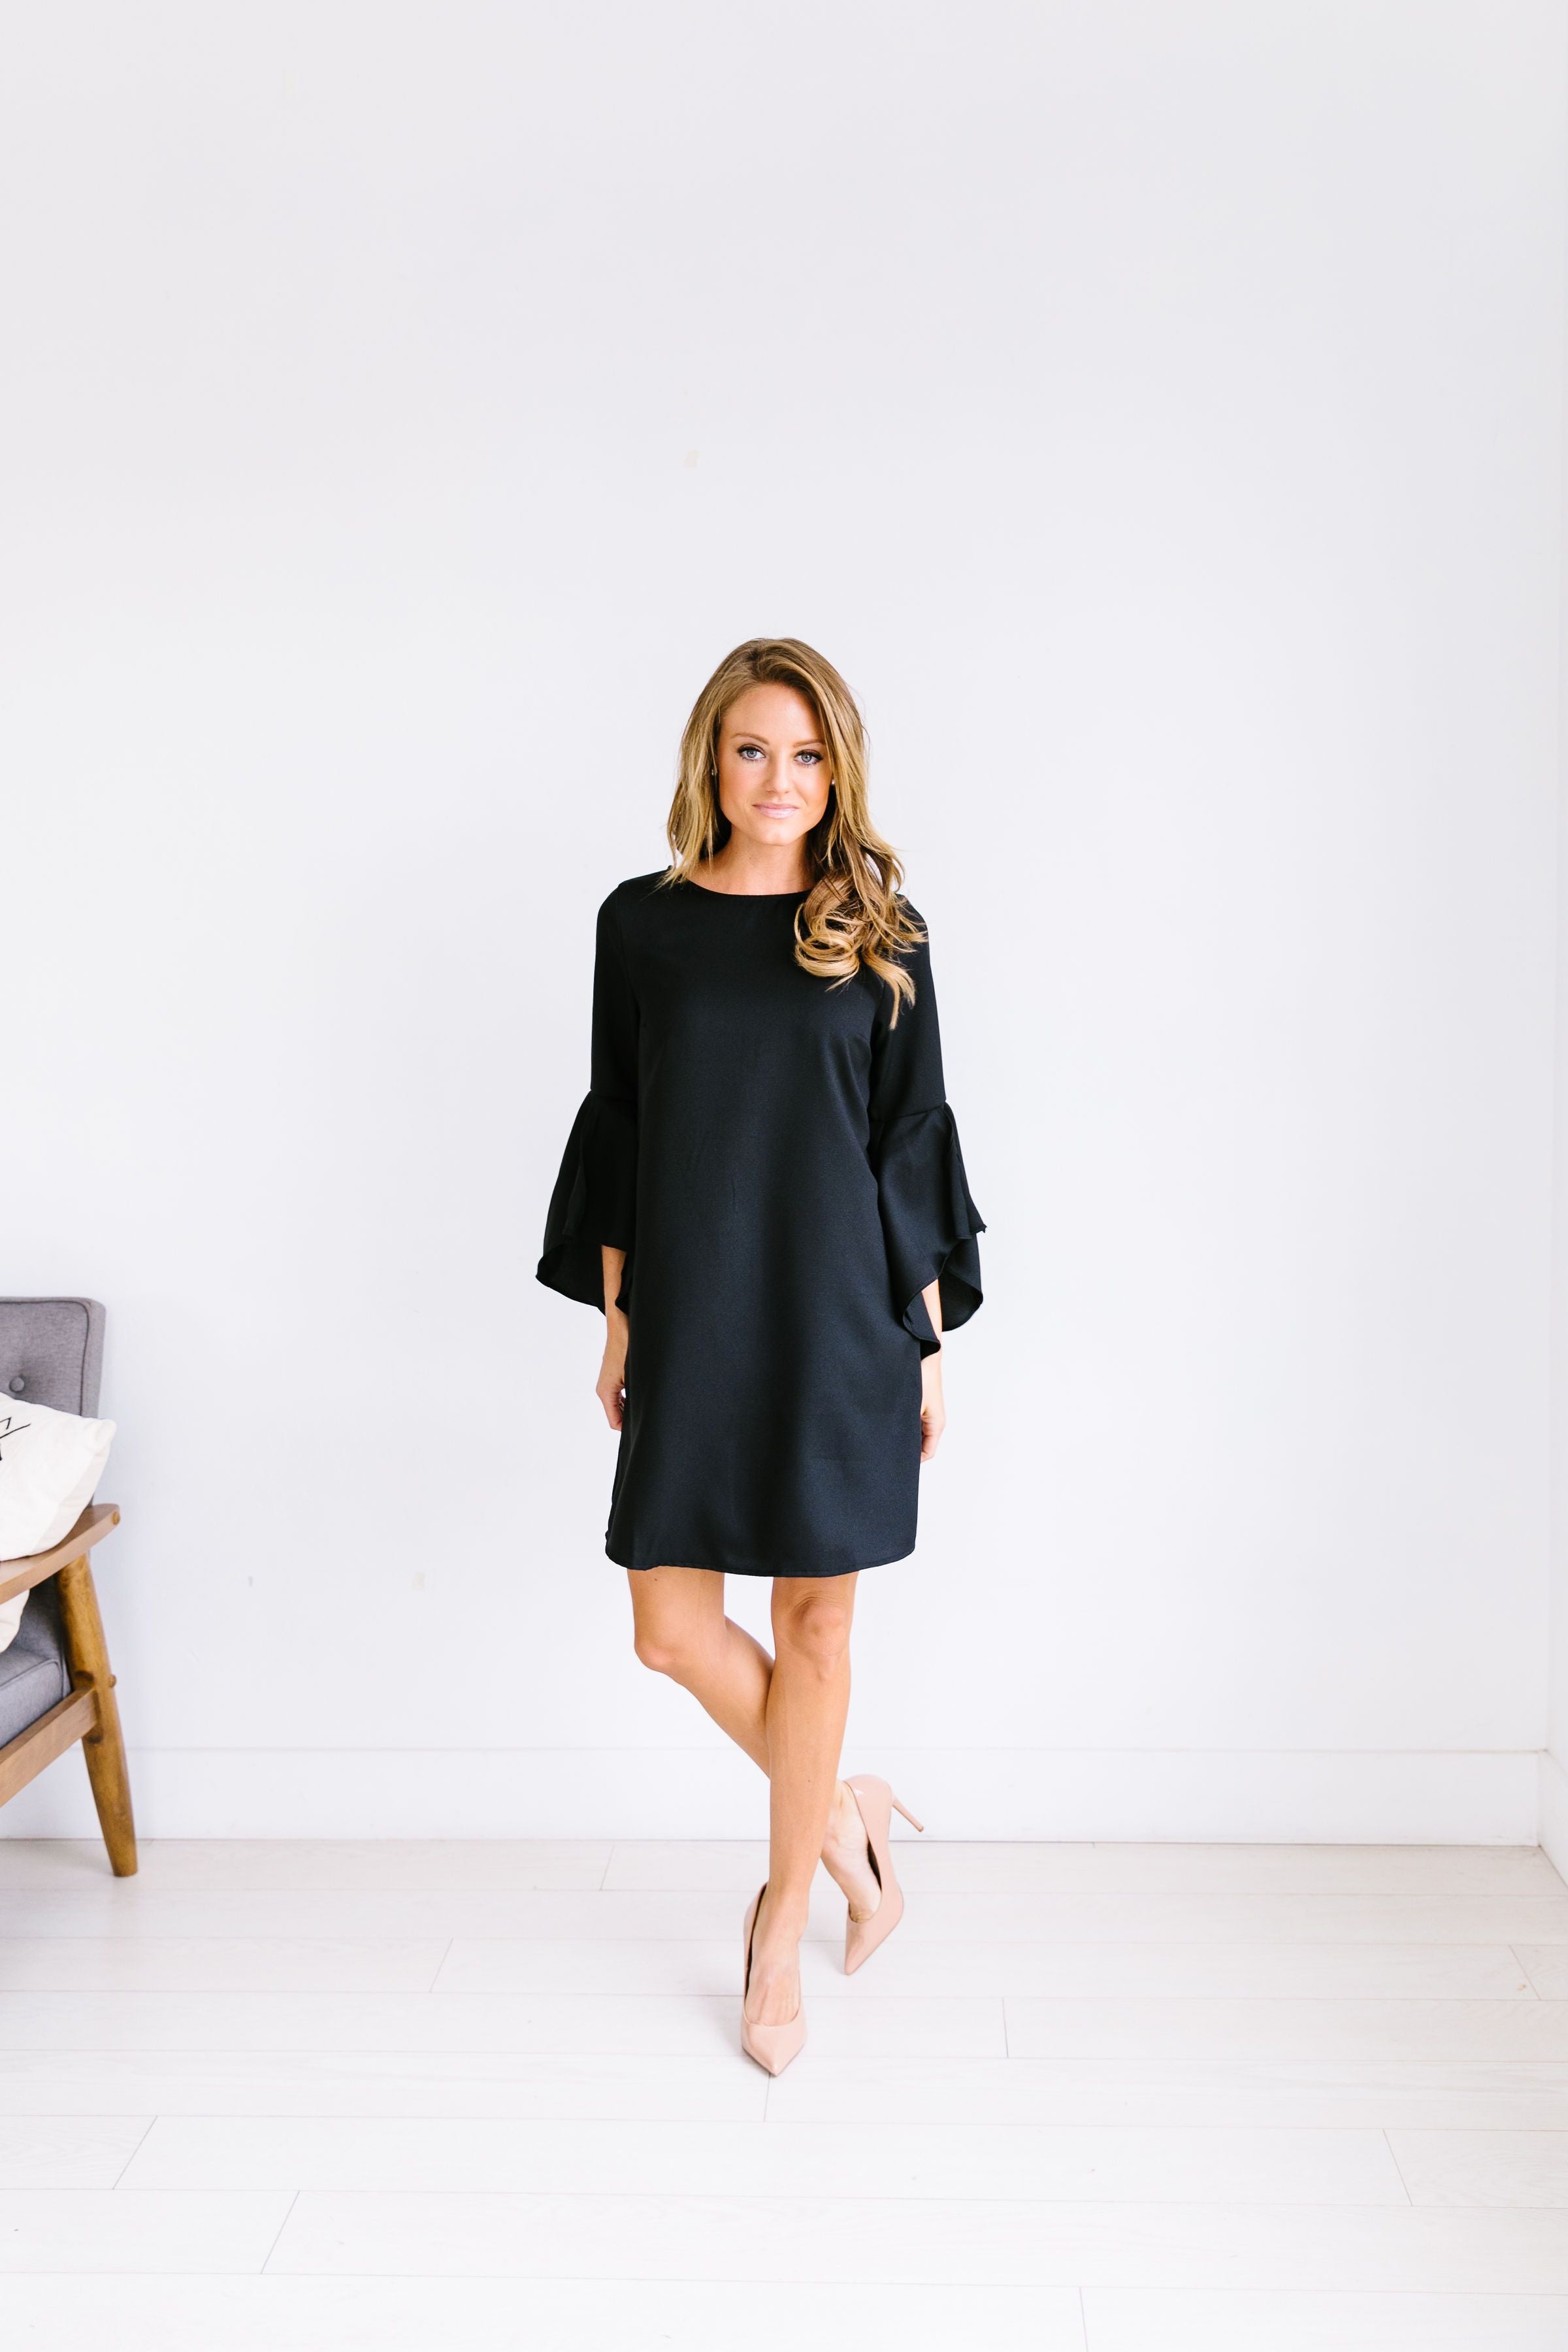 Simply Sophisticated Little Black Dress